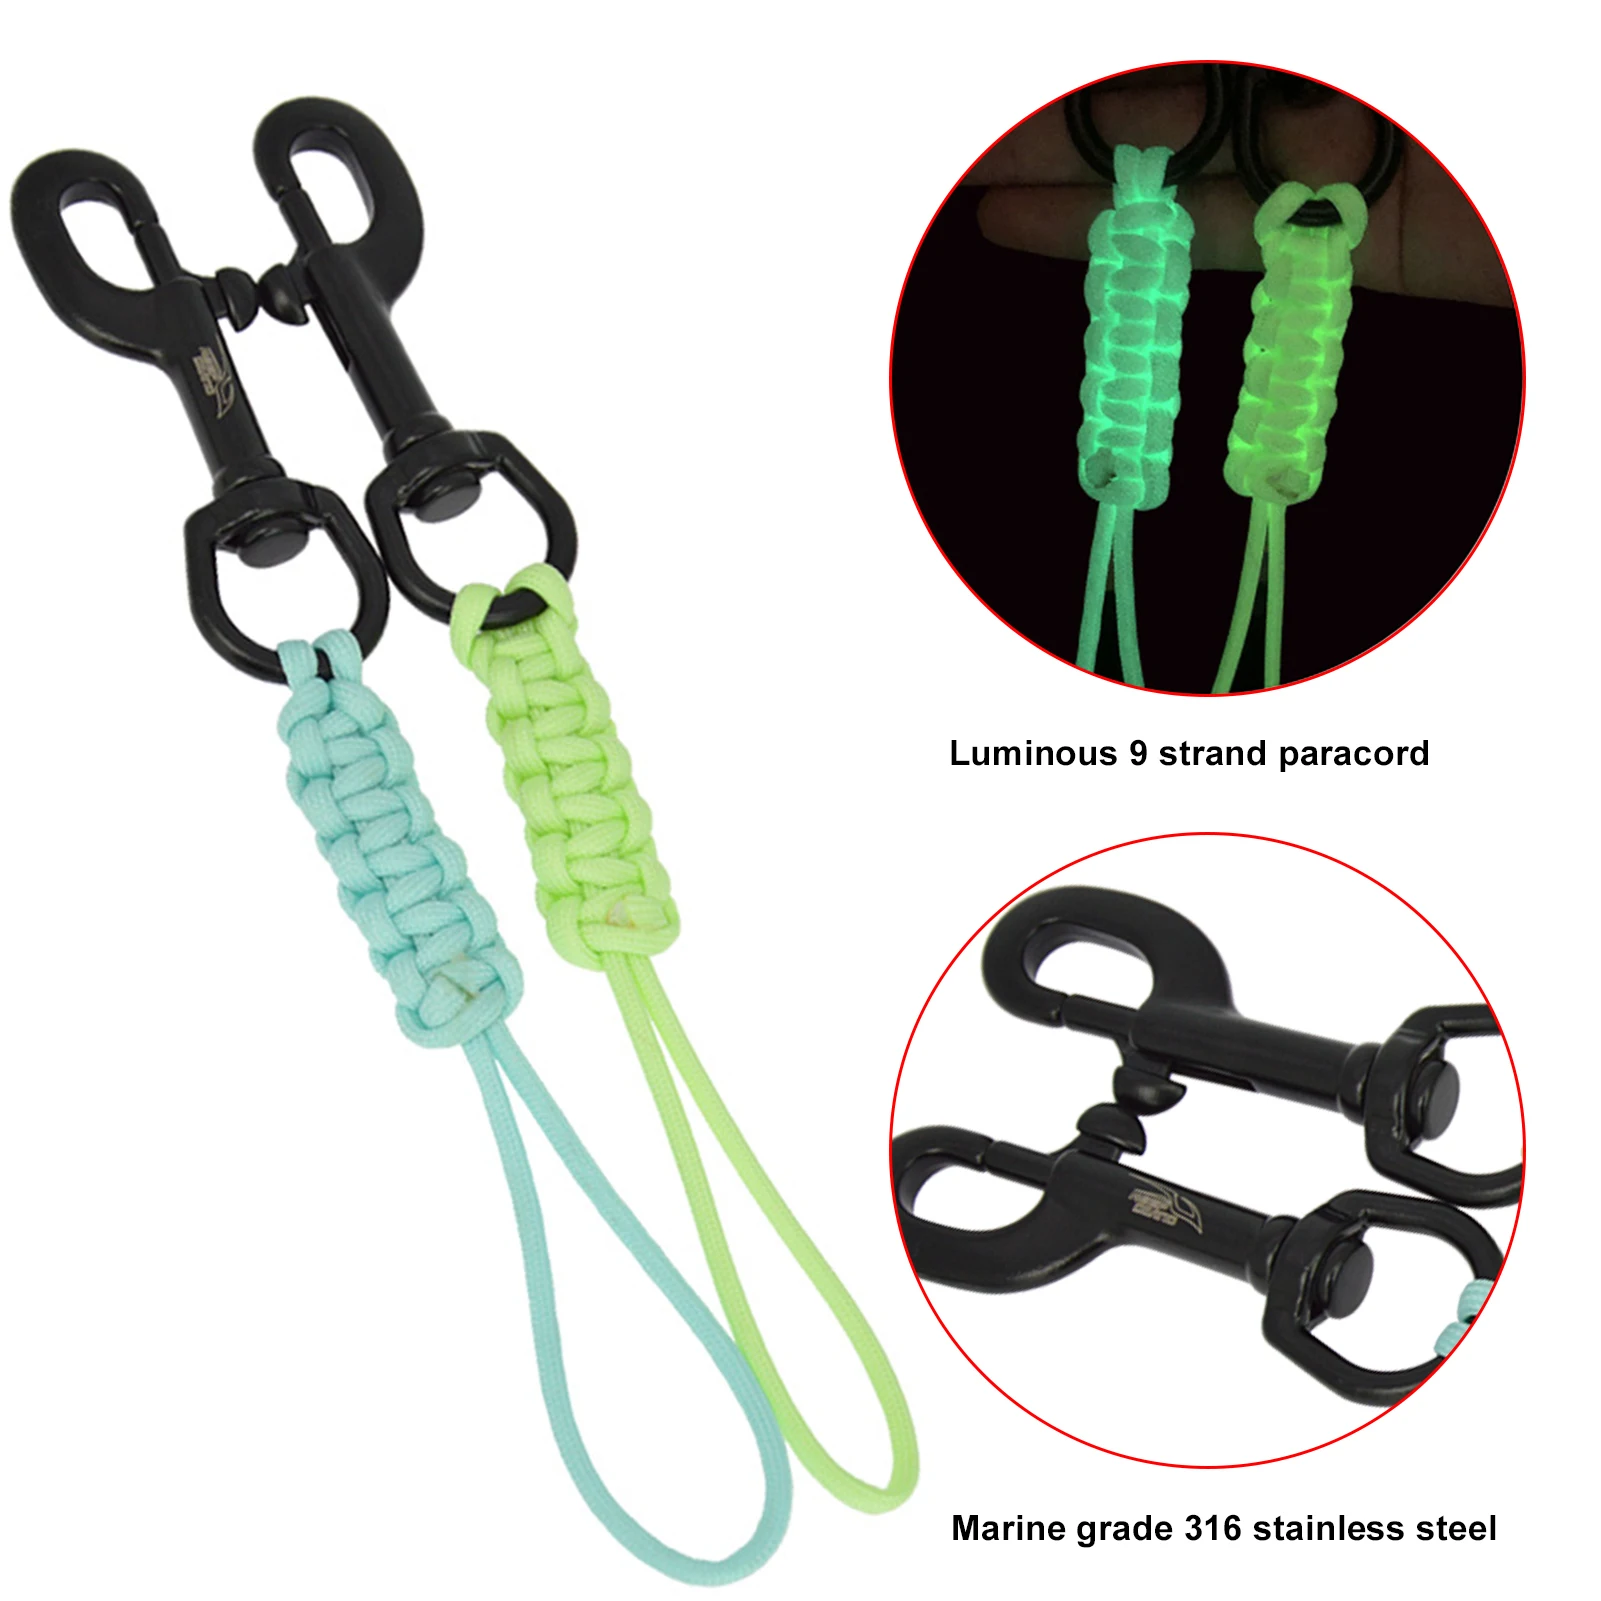 

Diving Swival Bolt Snap Hook Marine Grade 316 Stainless Steel Clip Anti-lost Reflective Safety Rope for Diving BCD Equipment